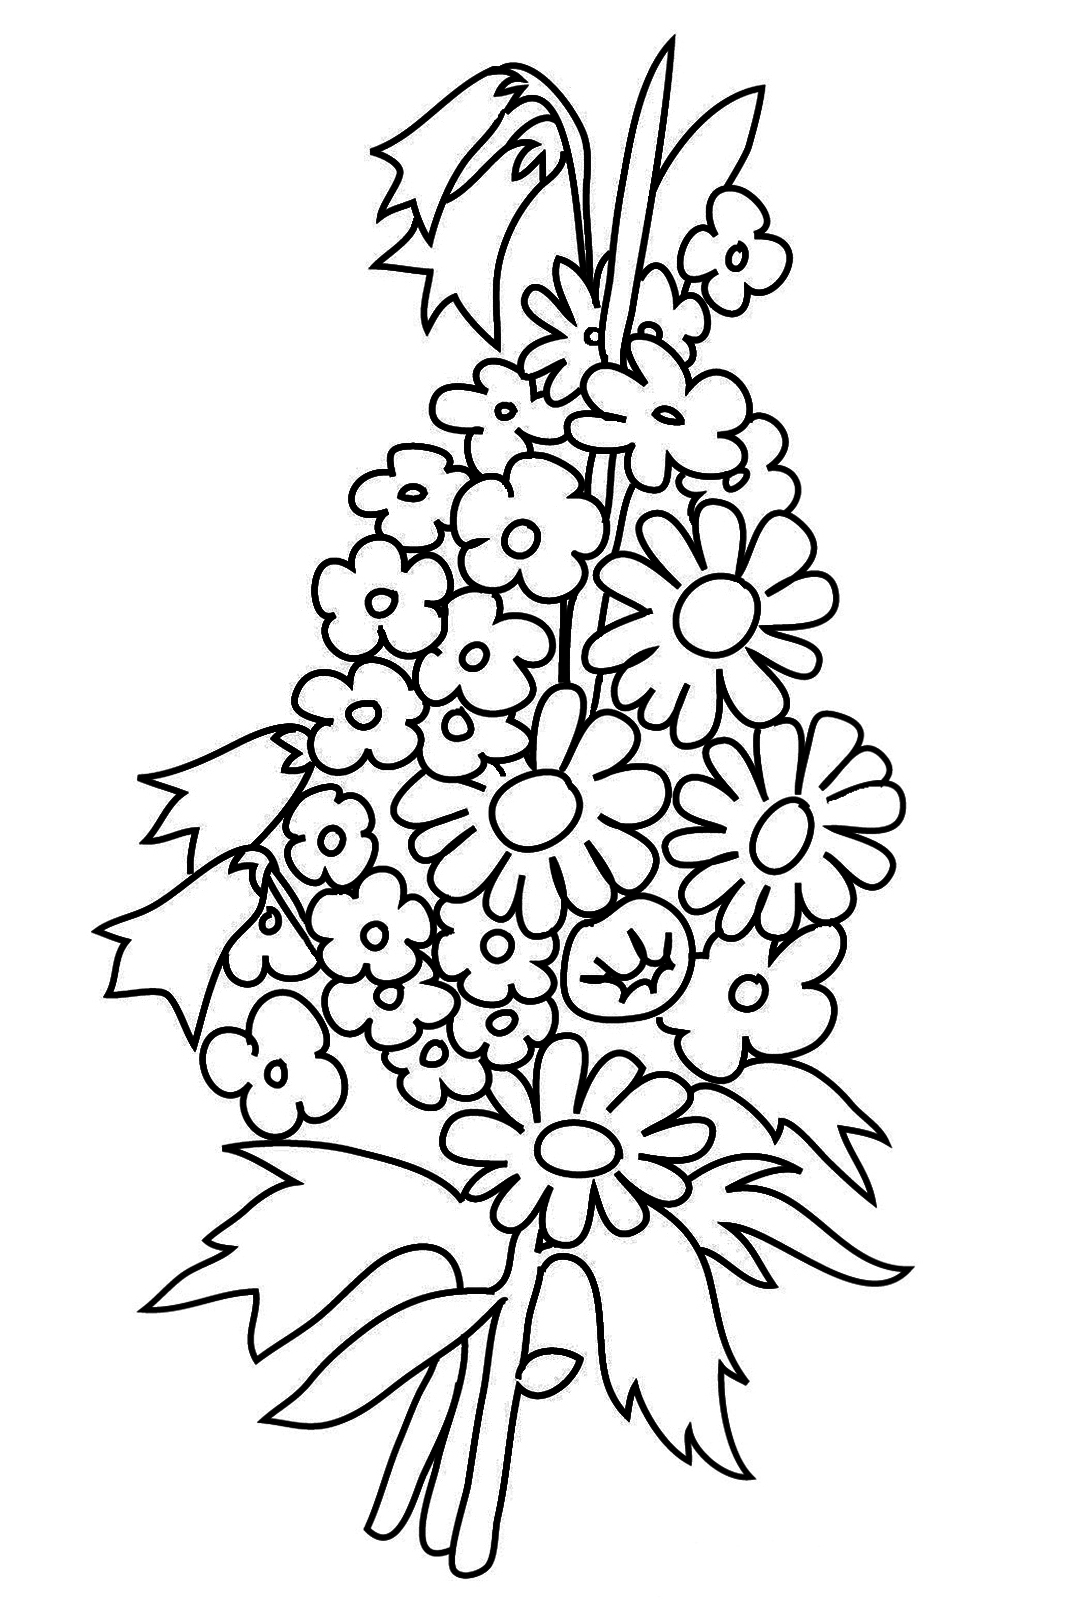 Bouquet Of Flowers Coloring Page Flower Coloring Pages